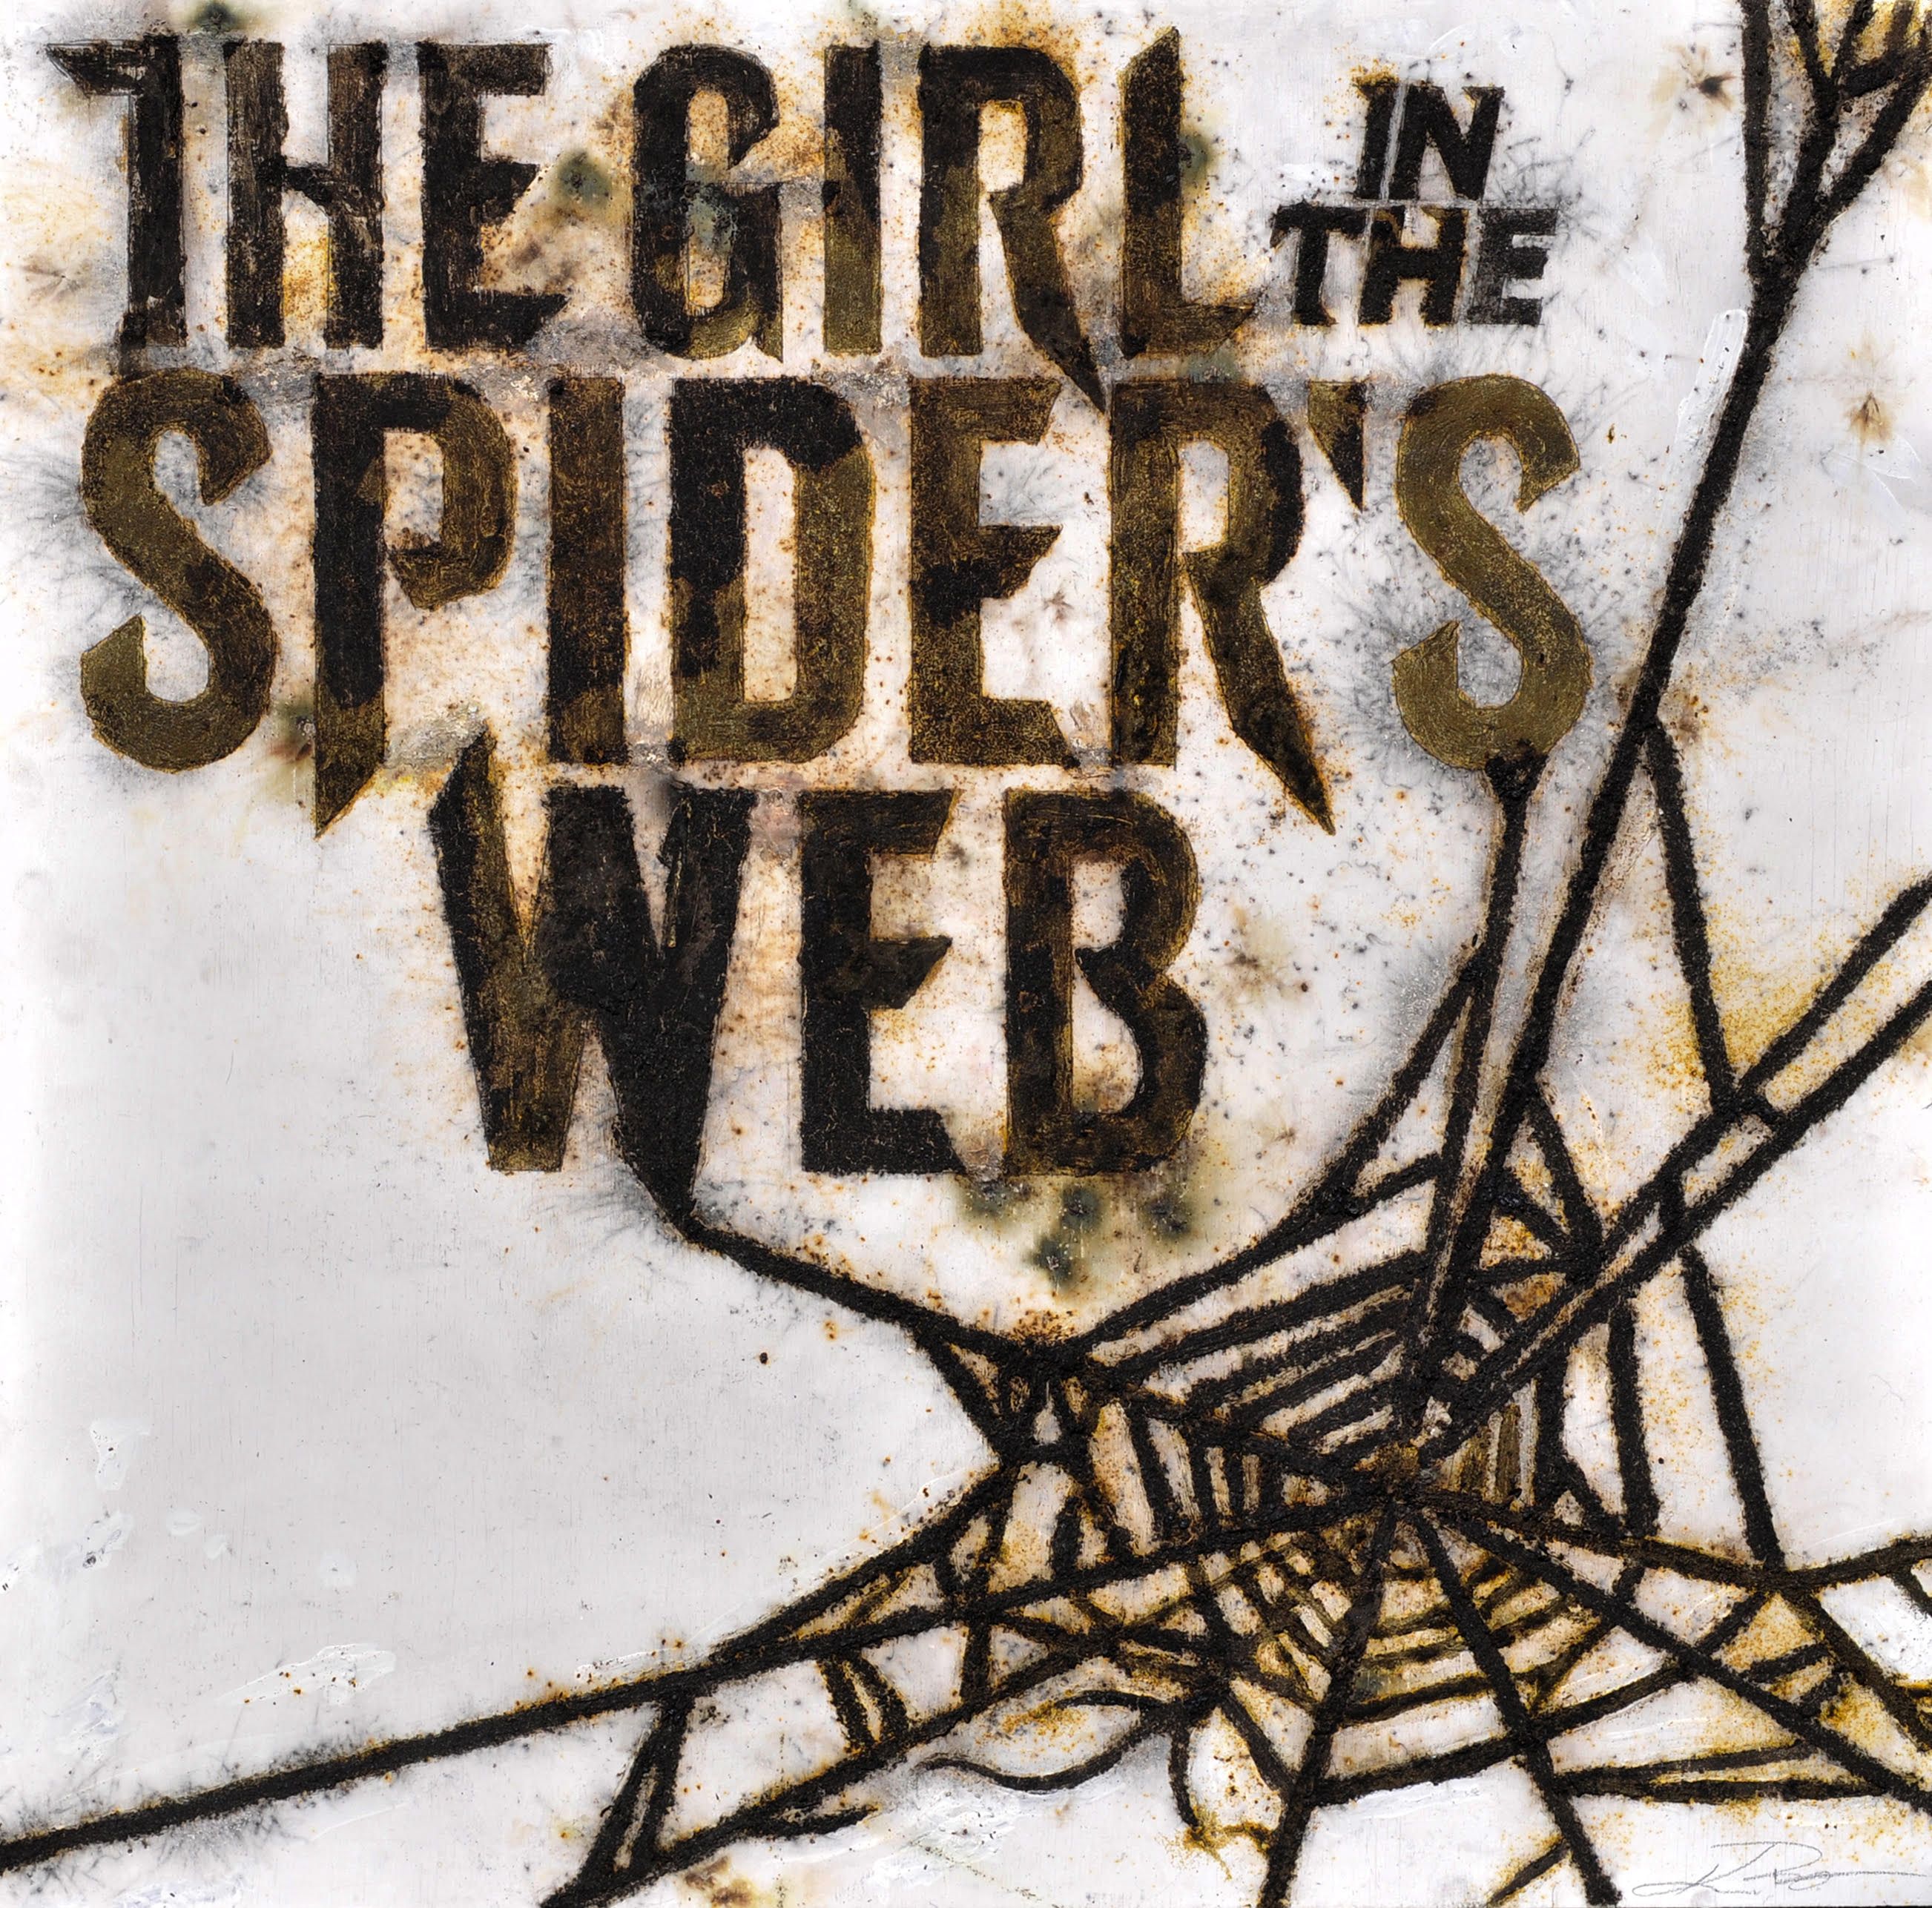 The Girl in the Spider's Web Kevin Rolly Art